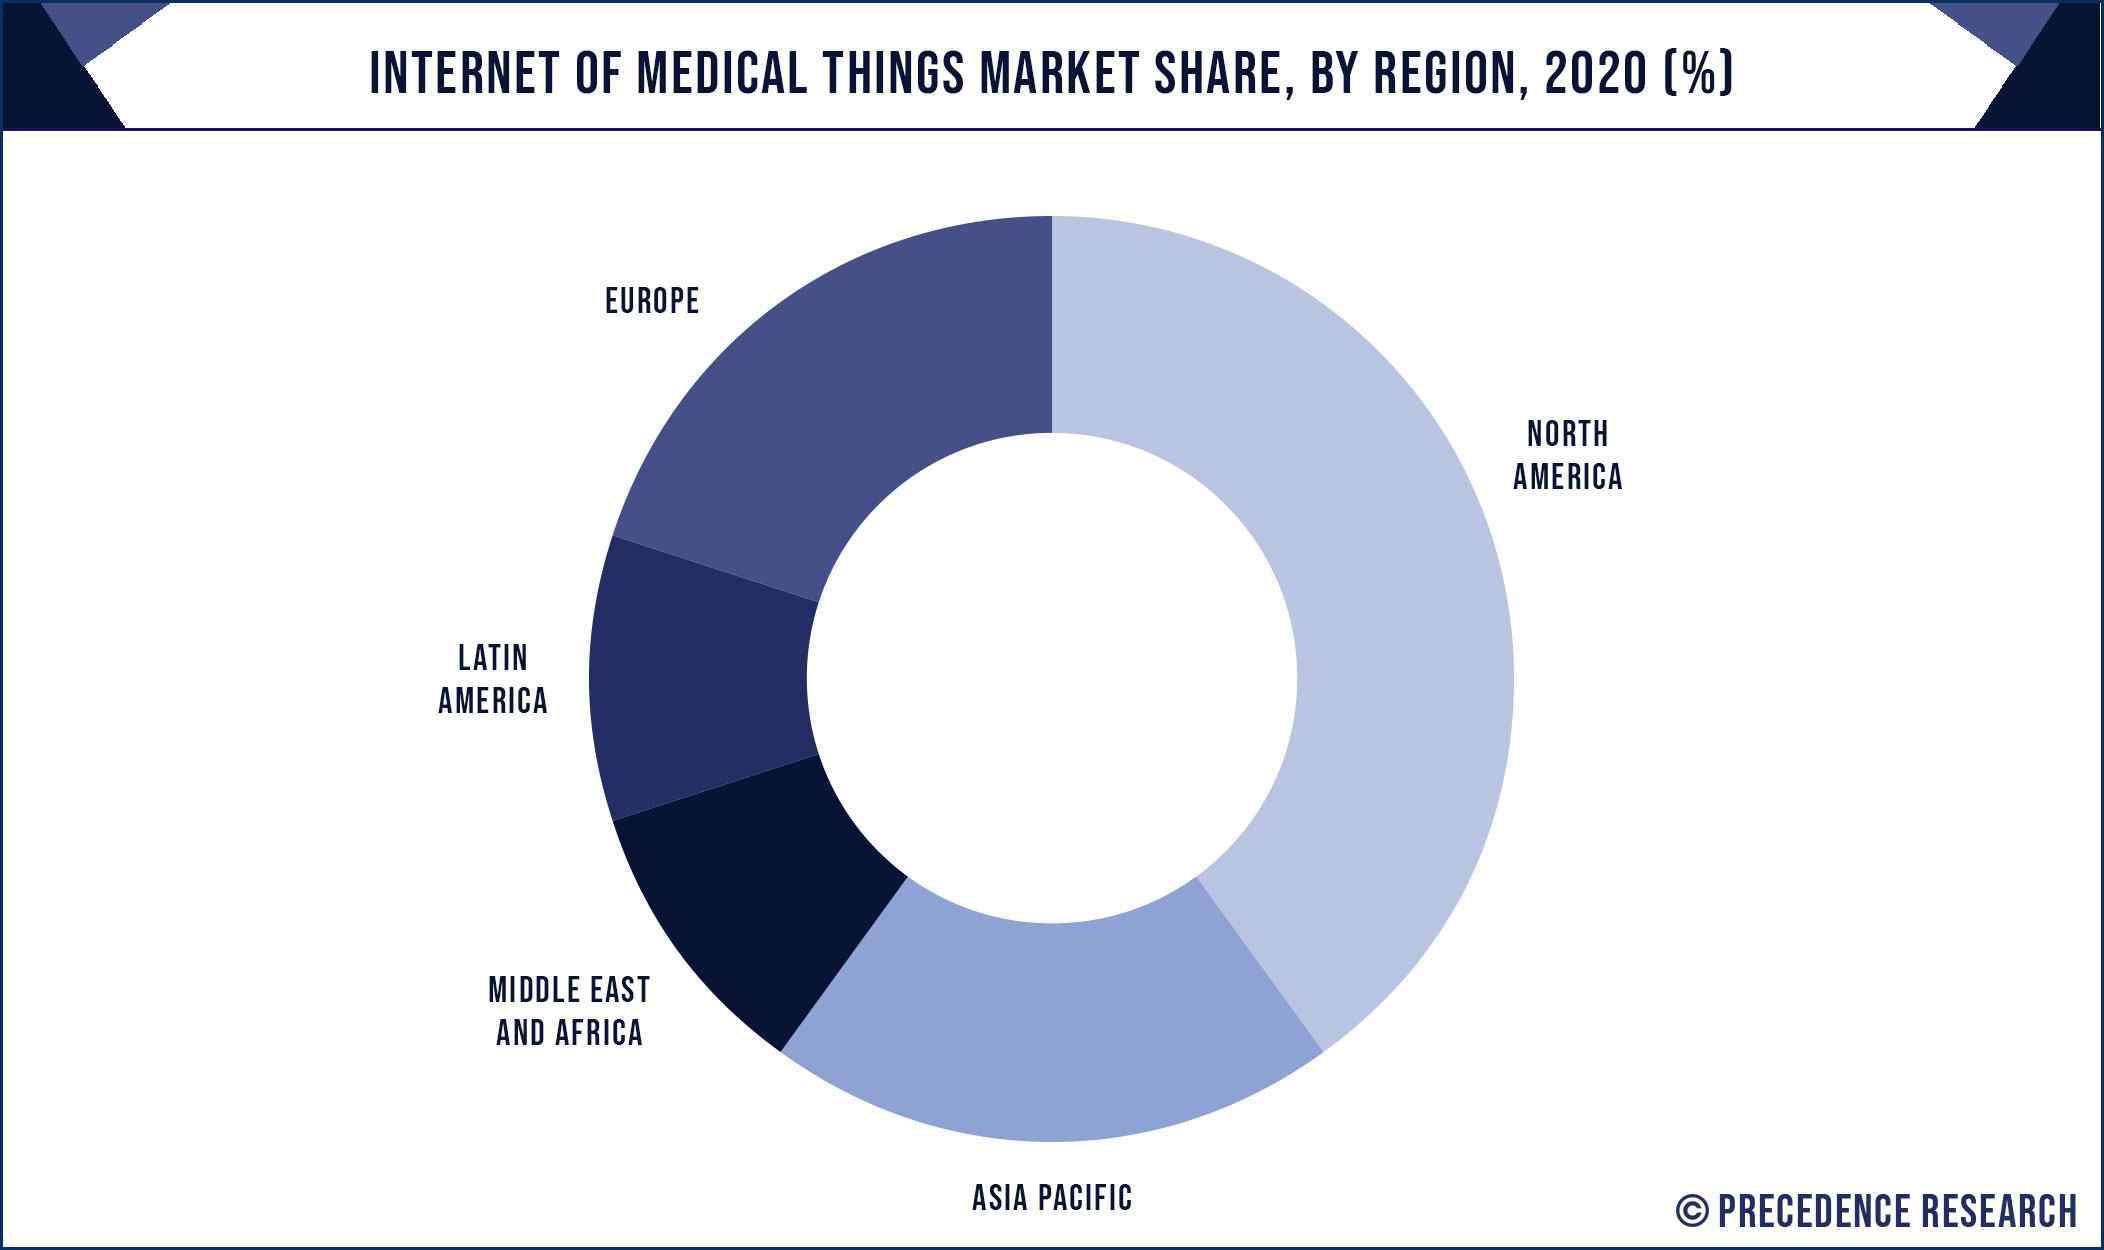 Internet of Medical Things Market Share, By Region, 2020 (%)